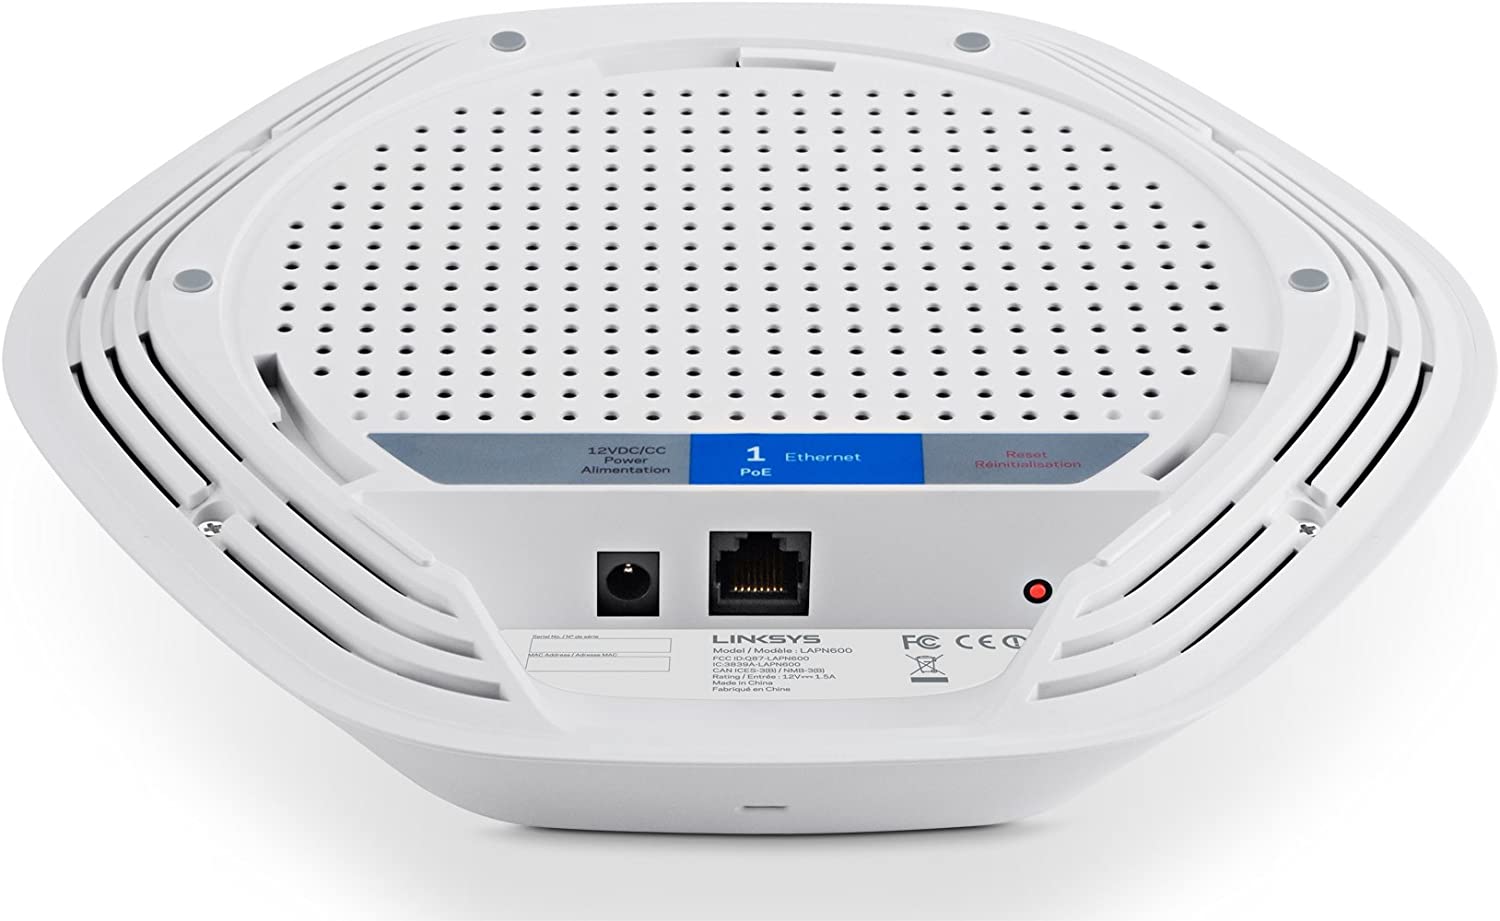 Linksys LAPN-600-EU N600 Access Point 600 Mbit/s PoE MIMO 2x2 Dual Band weiss